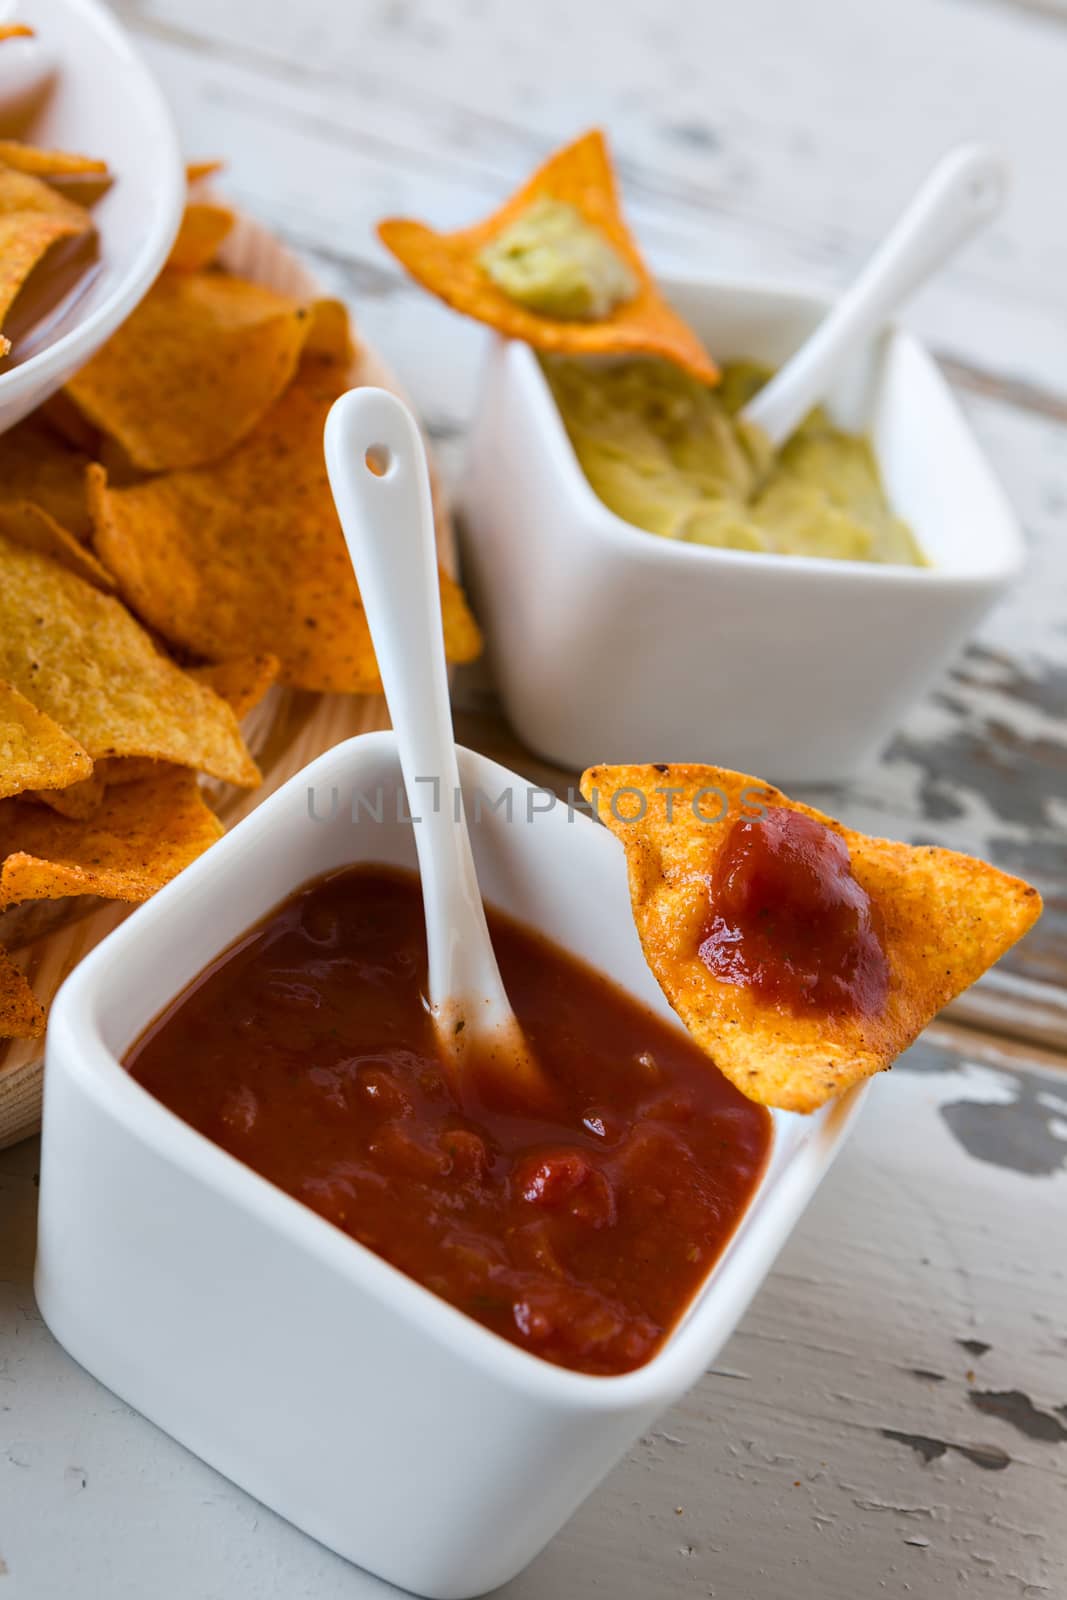 Chili sauce and nachos chips with guacamole sauce on background over an old wooden table